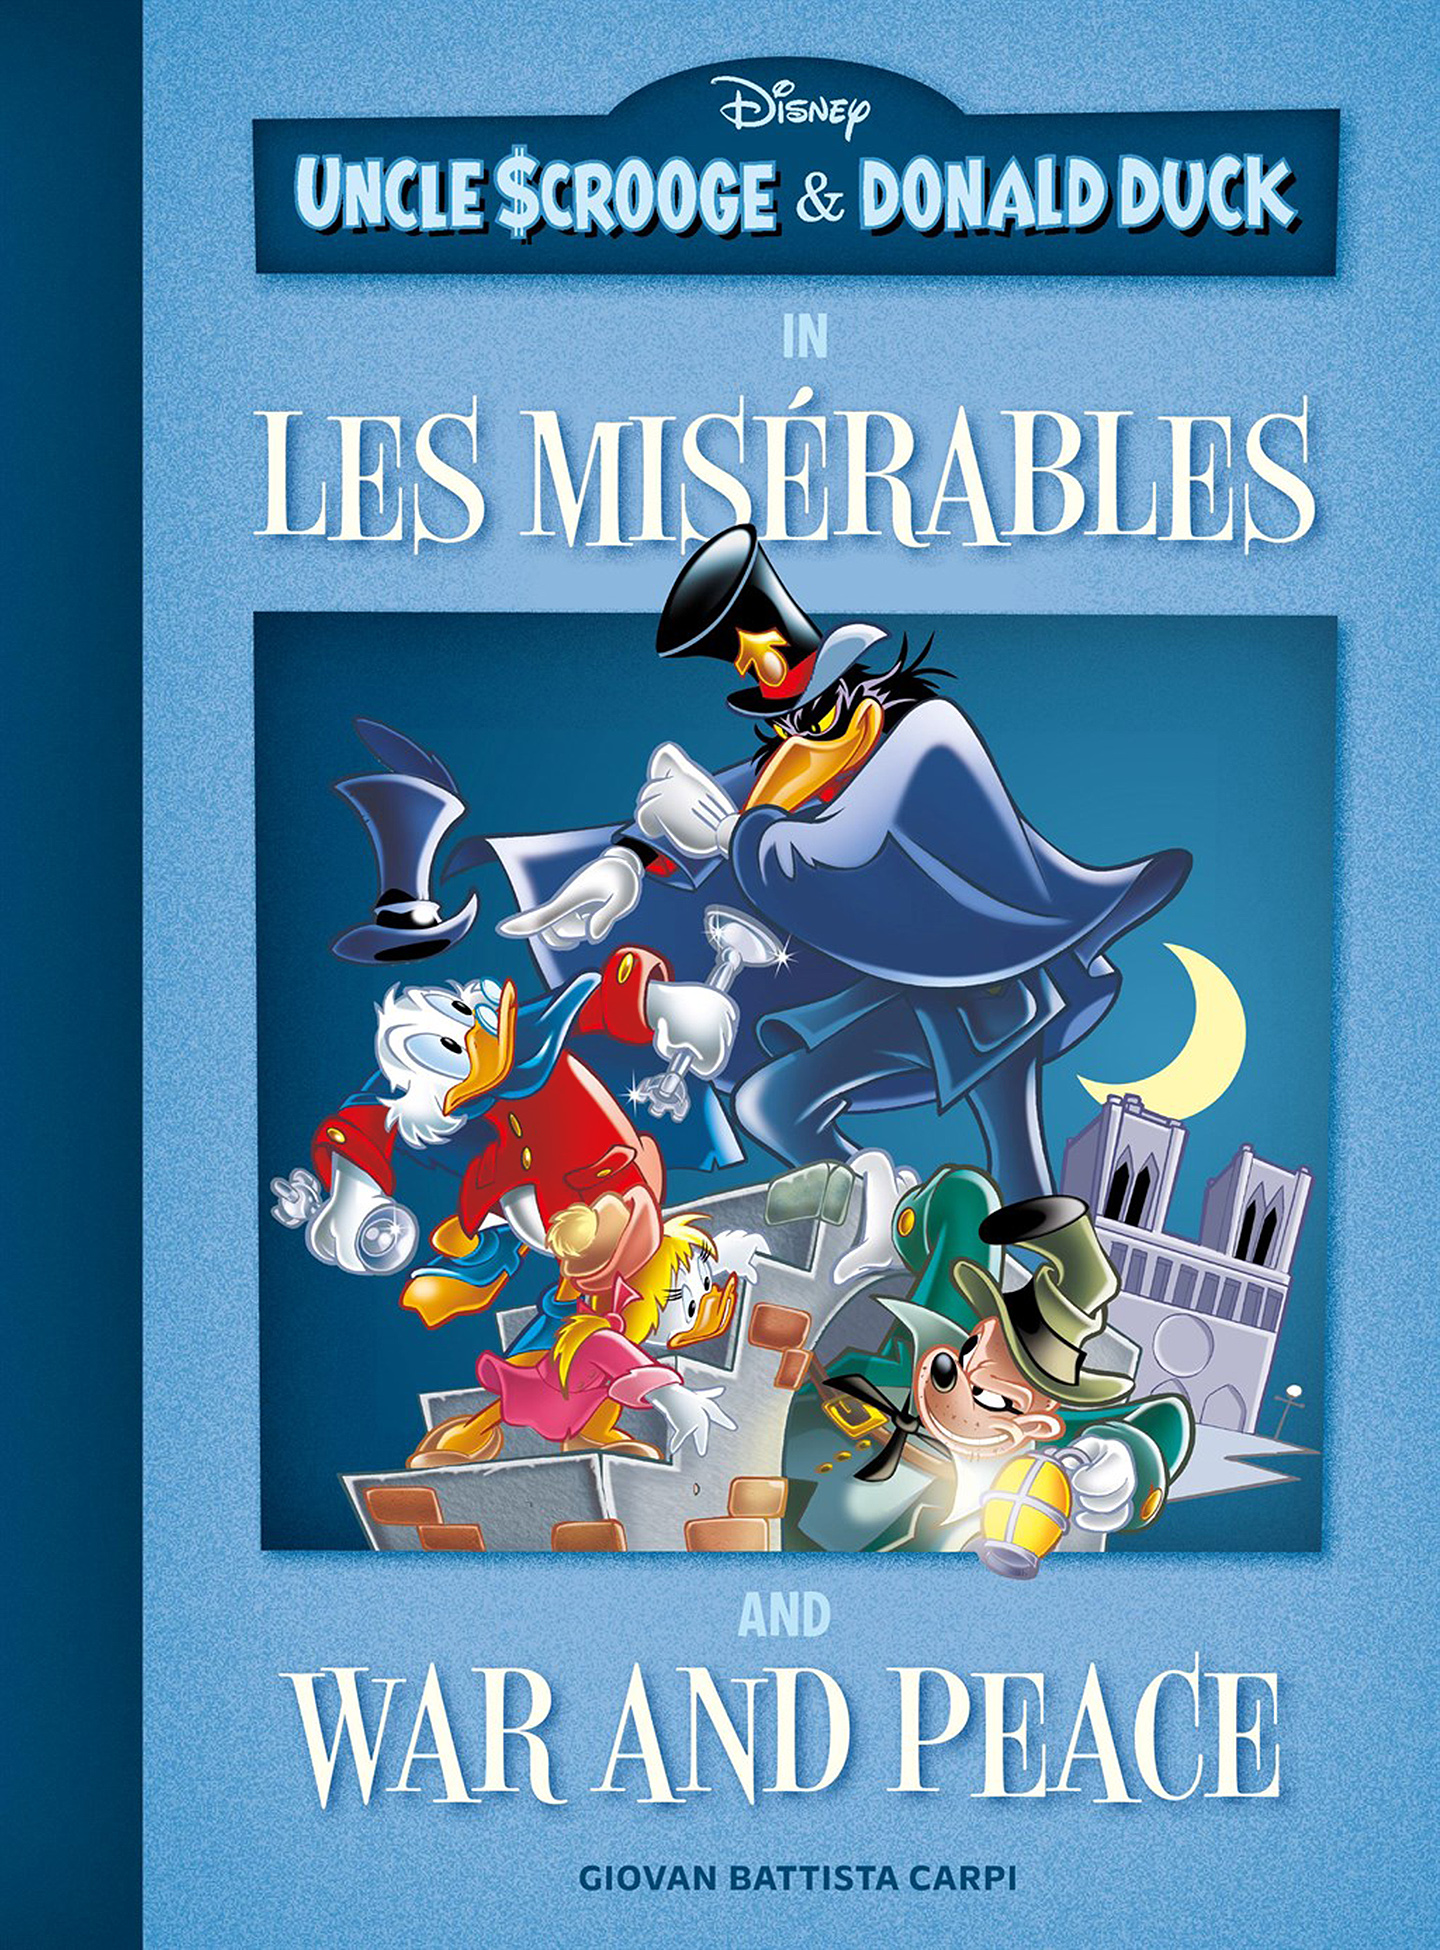 Read online Uncle Scrooge and Donald Duck in Les Misérables and War and Peace comic -  Issue # TPB (Part 1) - 1